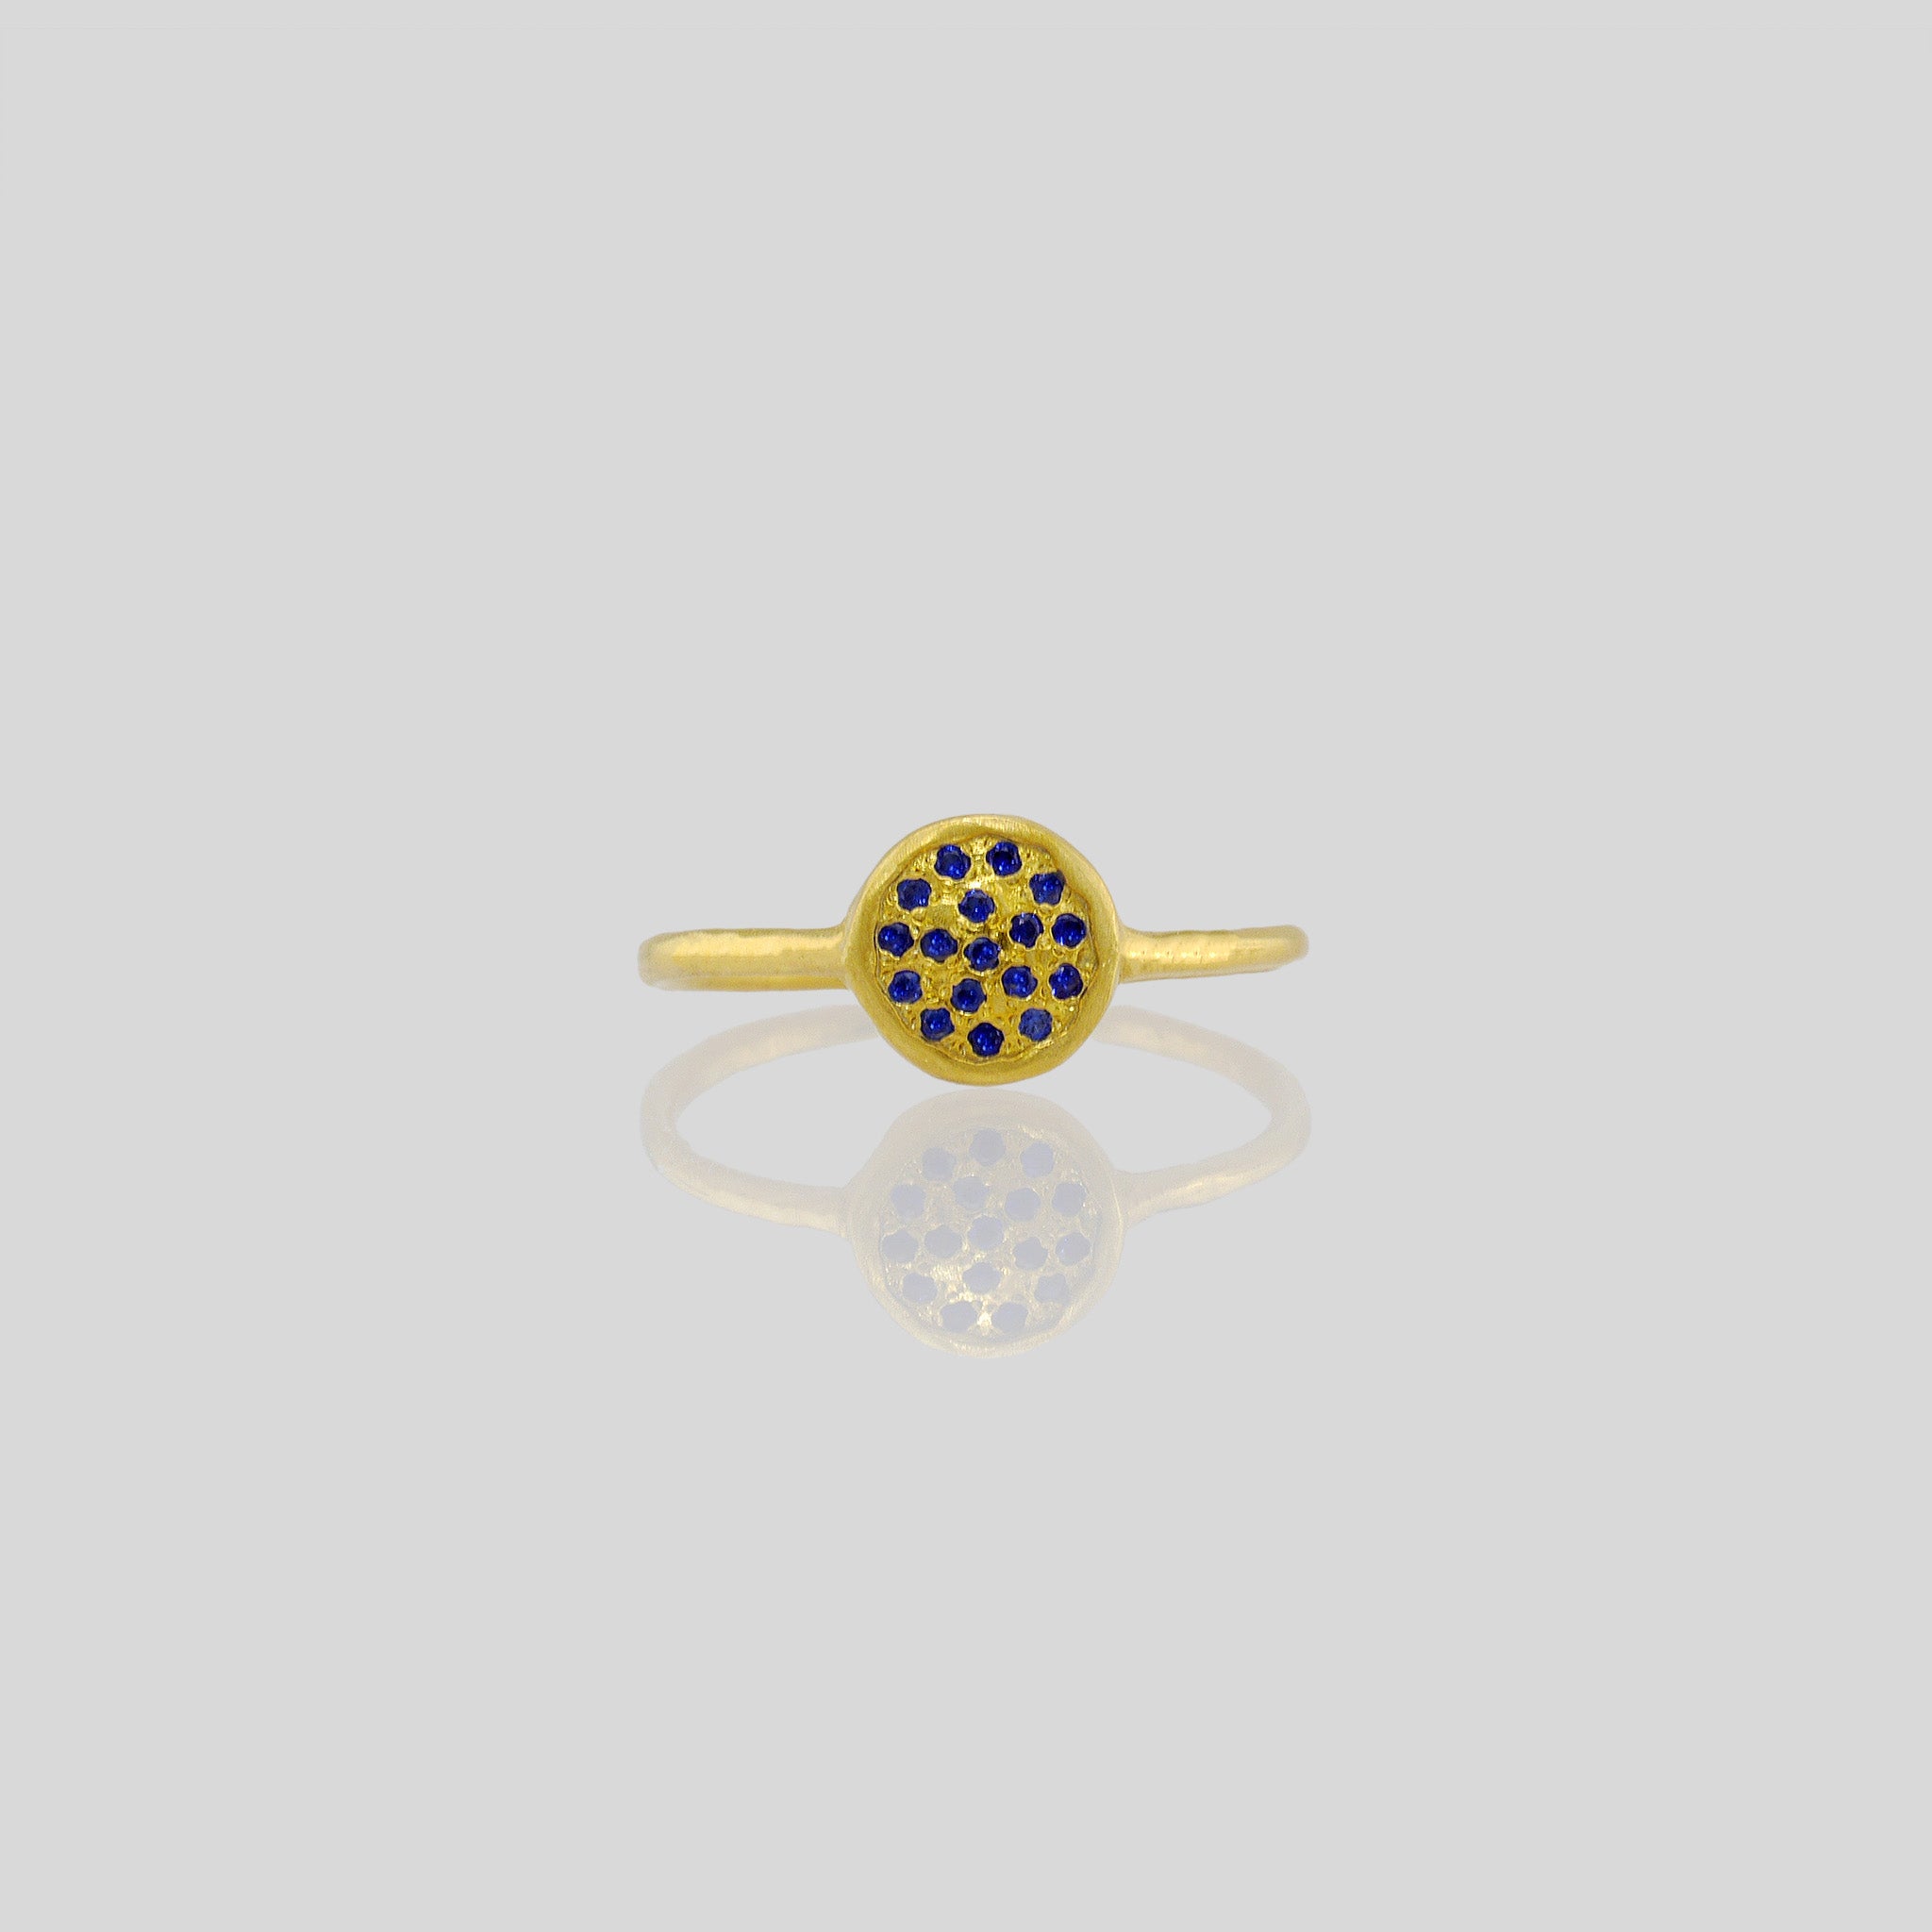 Front view of a Delicate hand-made gold ring with a circular plate set with tiny Sapphires. The sparkle from the stones resembles a starry night. 